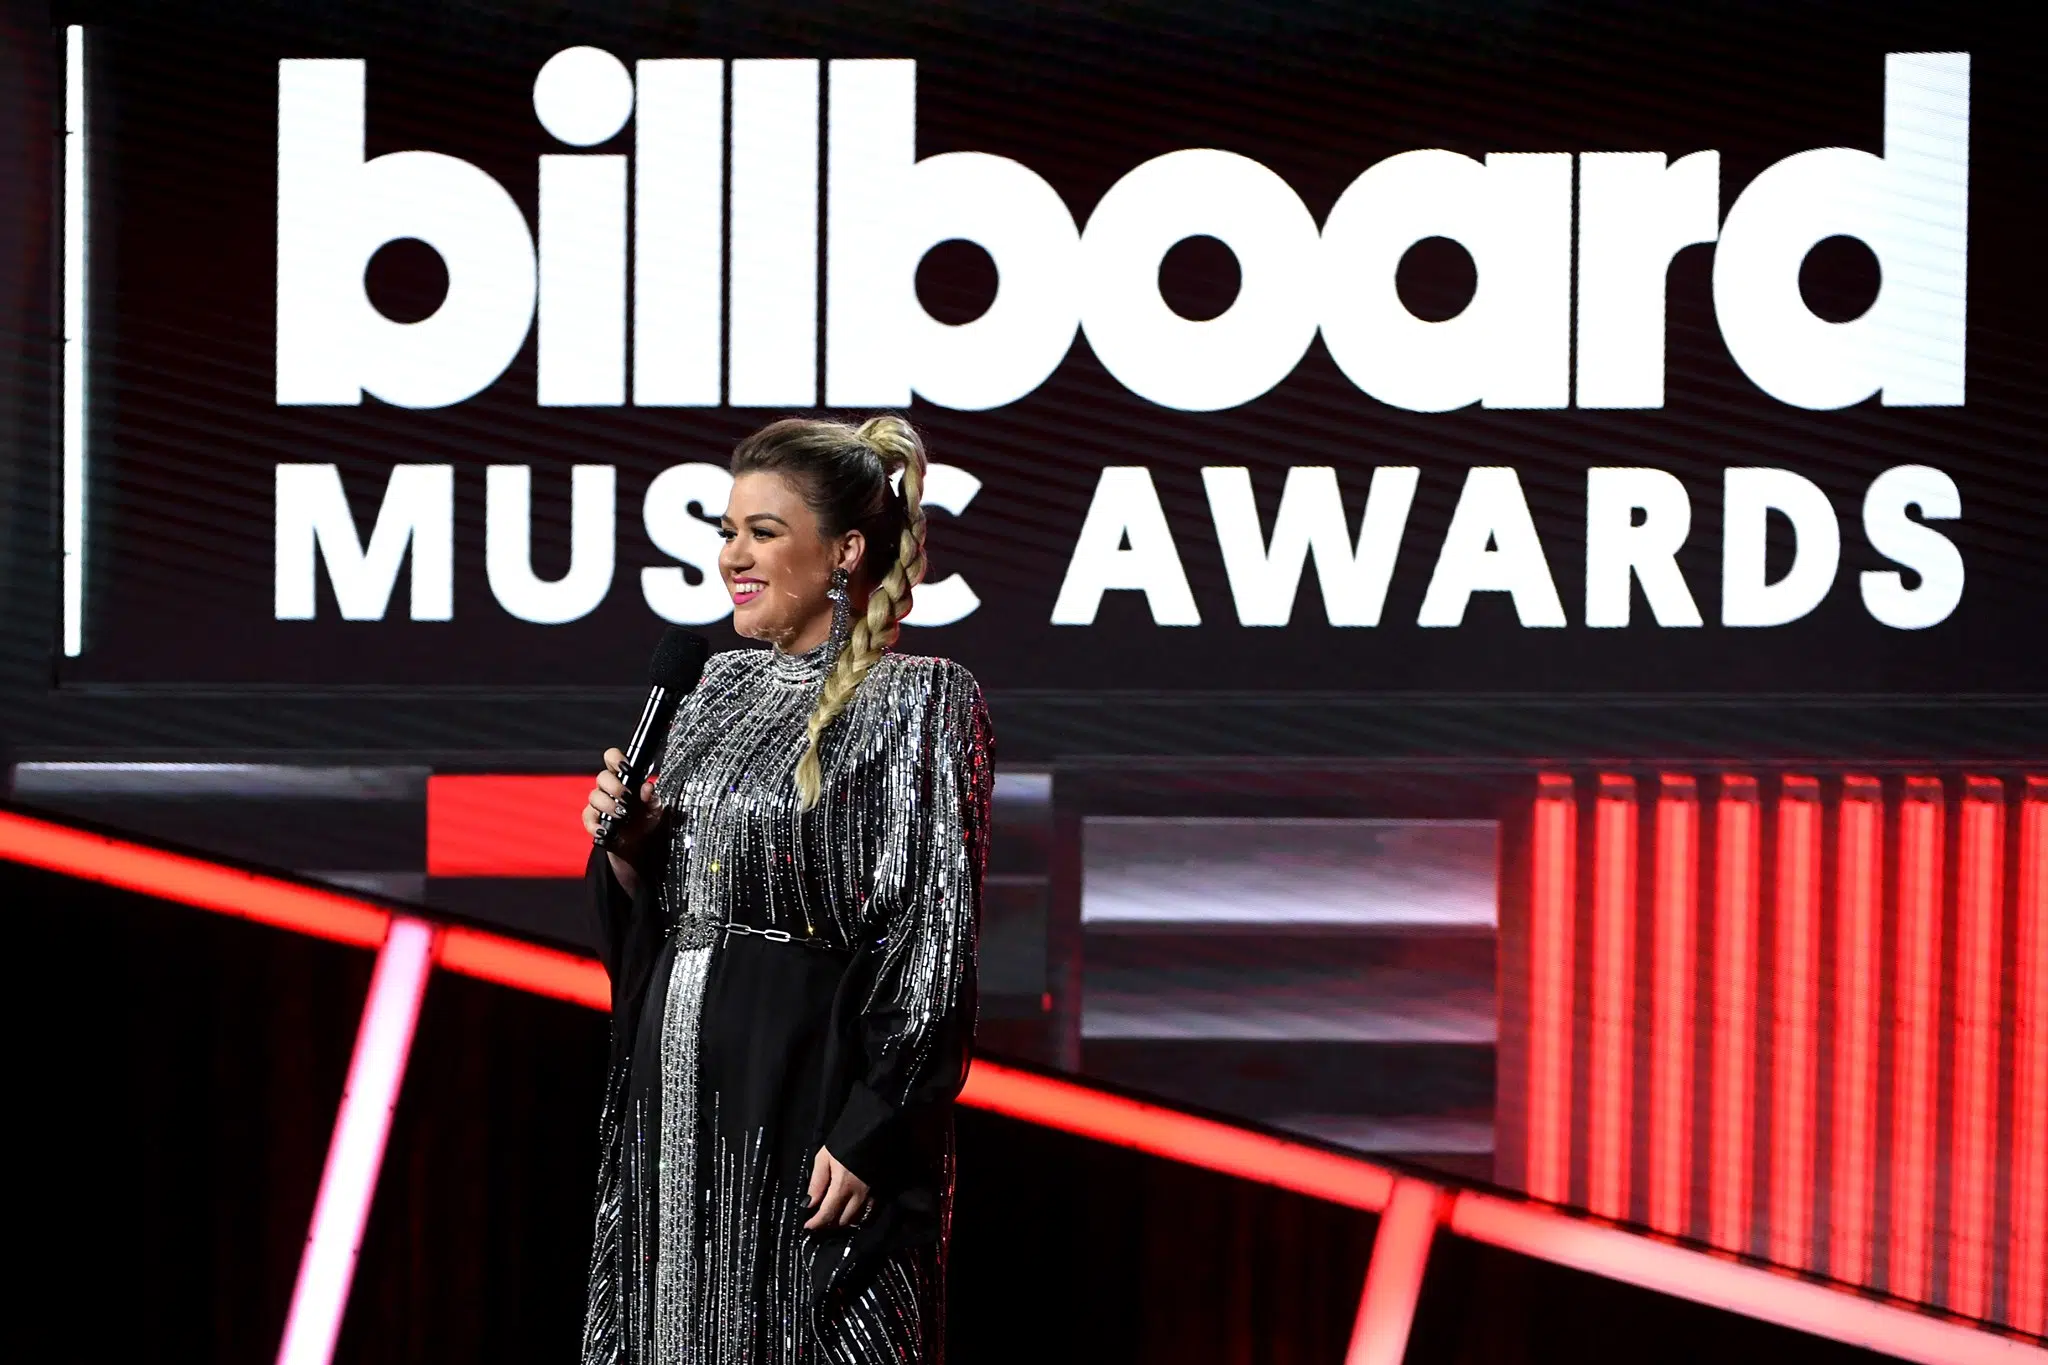 2021 Billboard Music Awards Confirmed For May